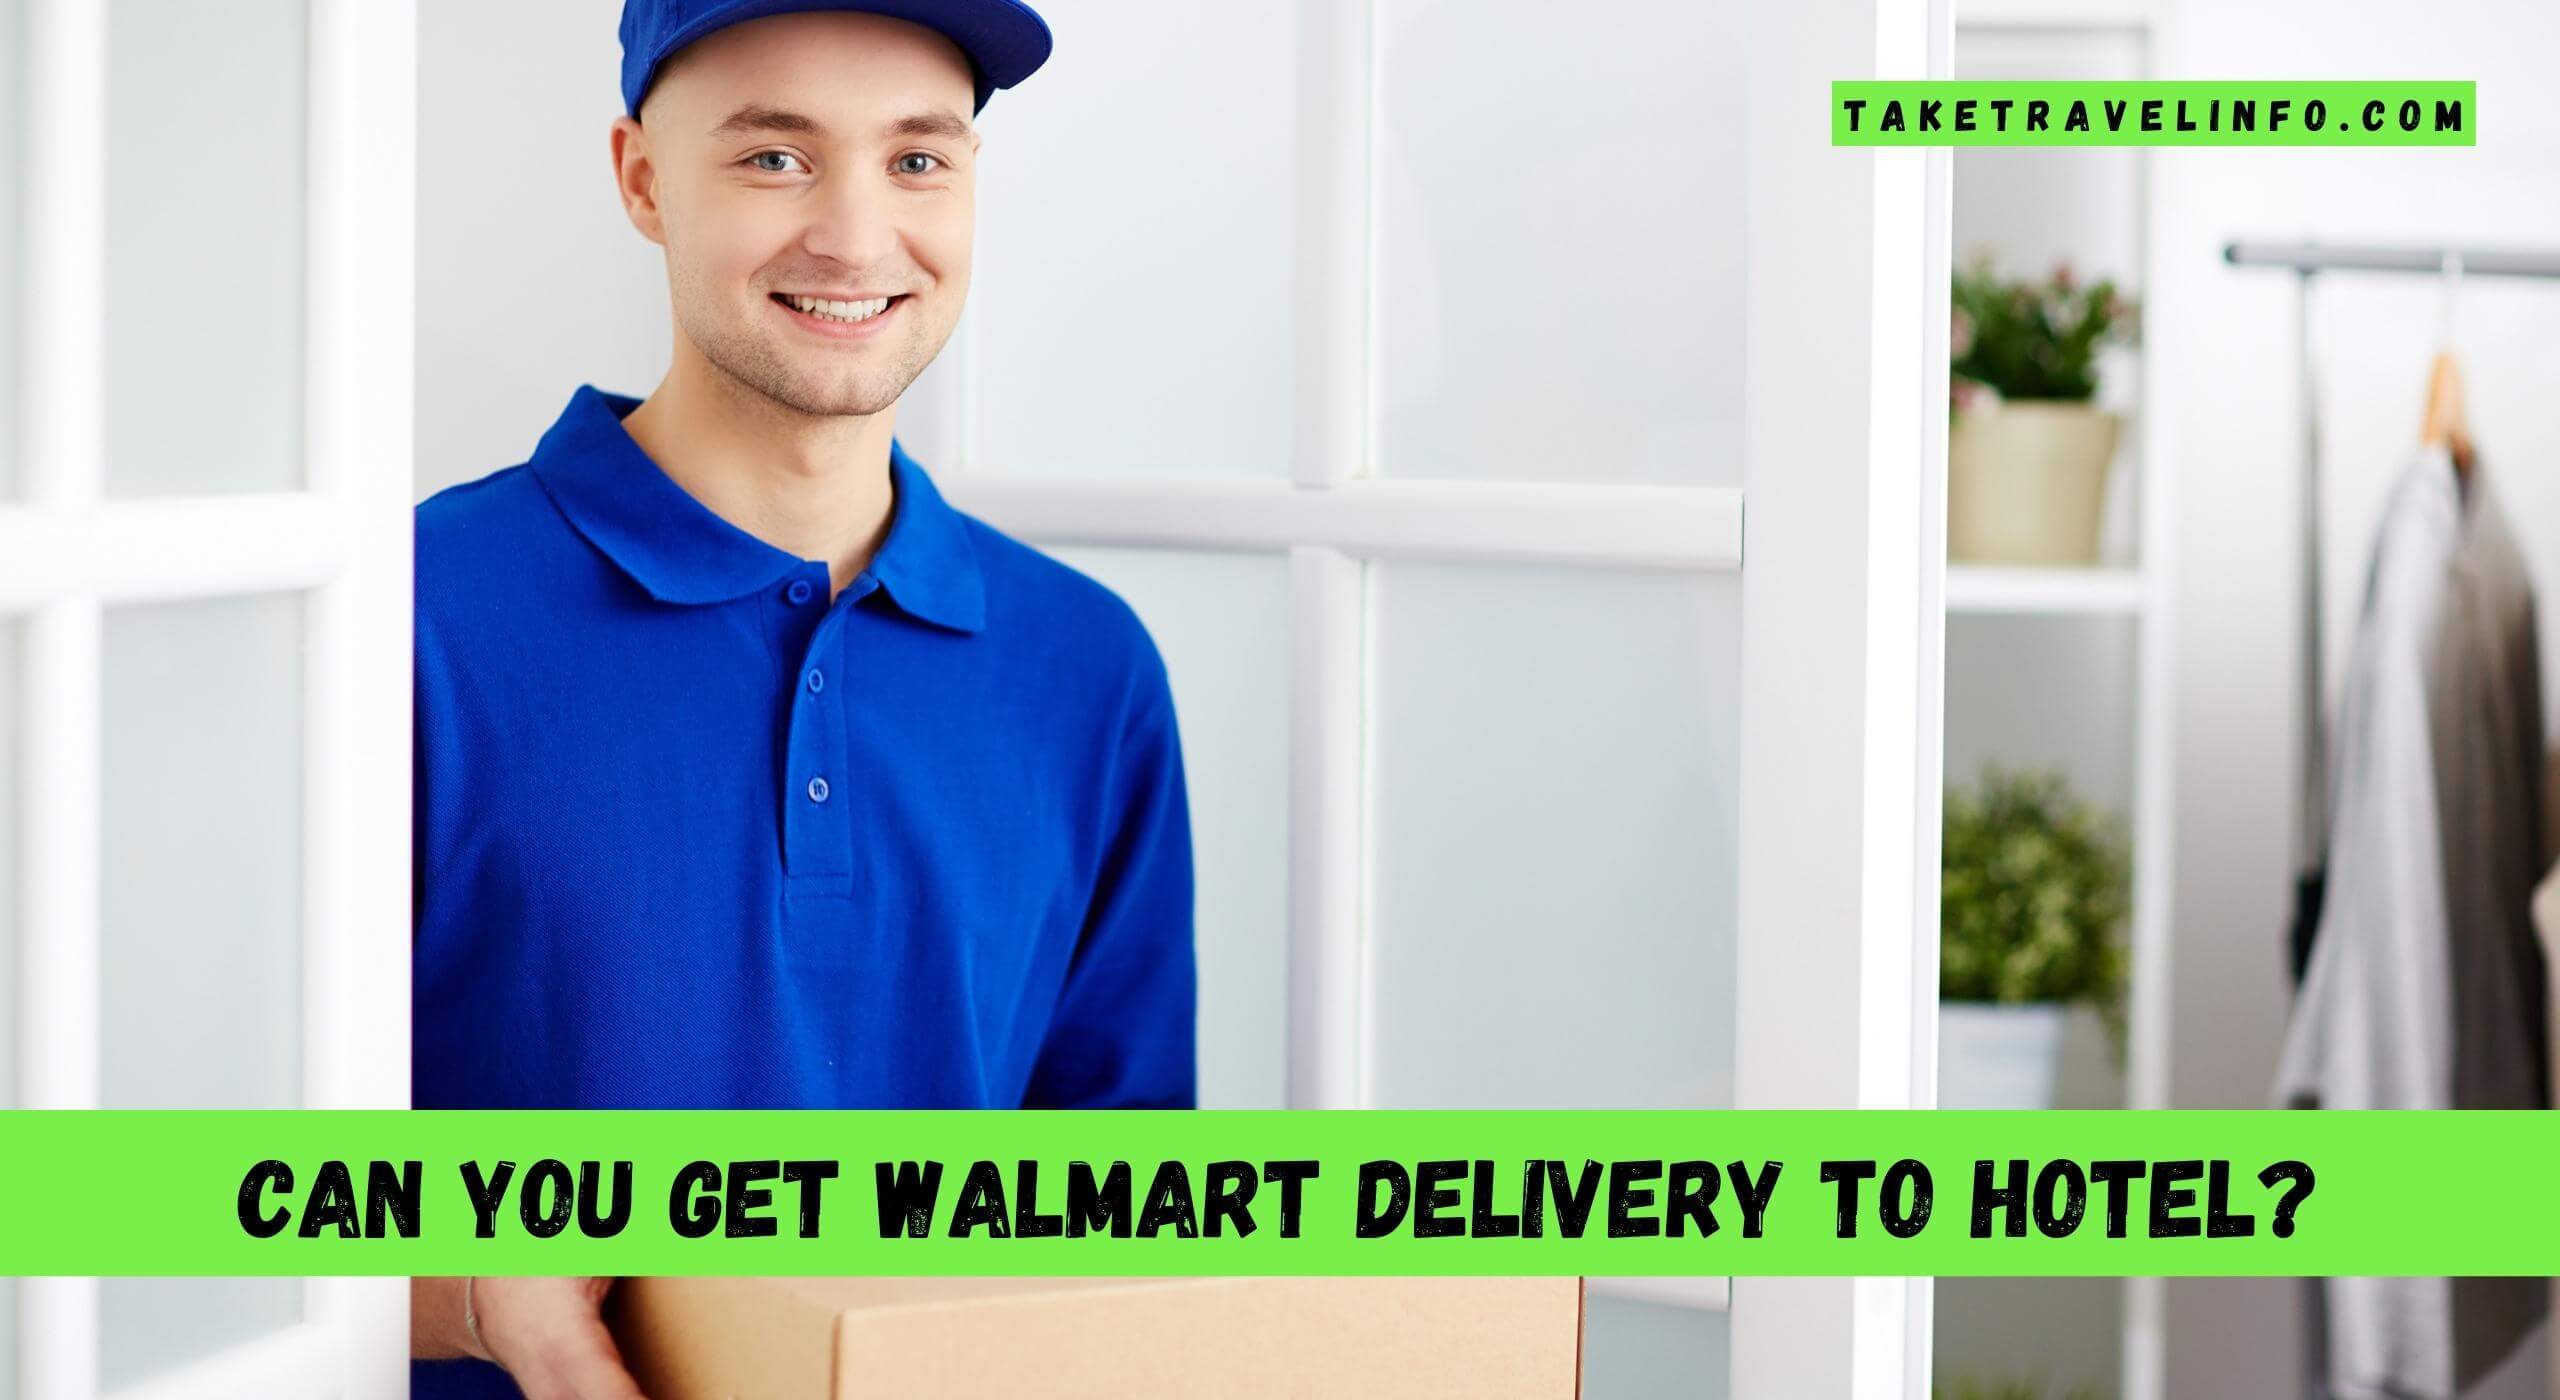 Can You Get Walmart Delivery To Hotel?